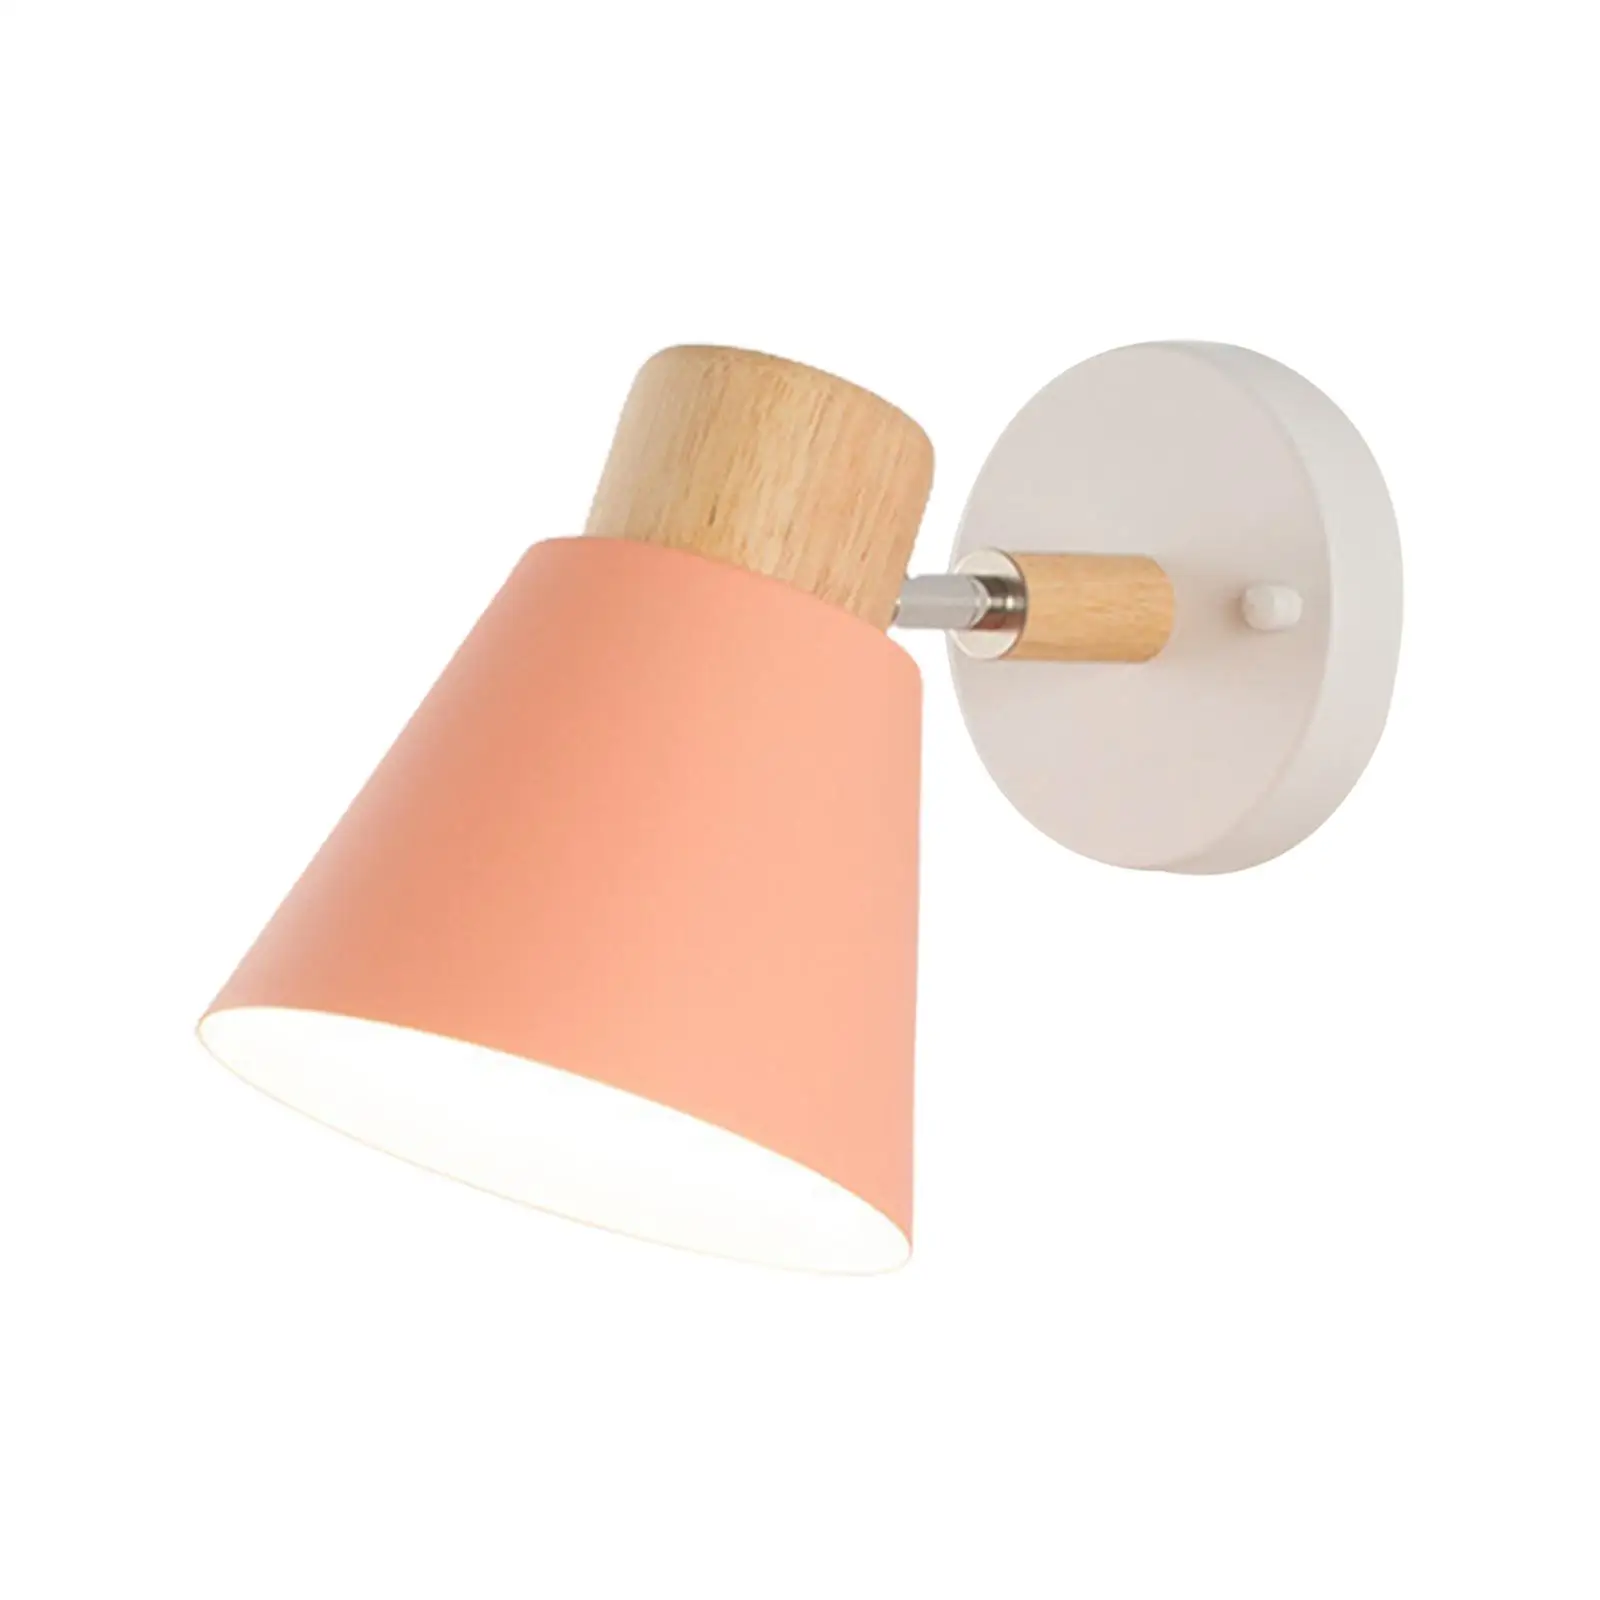 Nordic Wall Lamp Bedside Wall Lamp Decorative E27 Light Fixture Wall Sconce Lighting for Room Corridor Bedroom